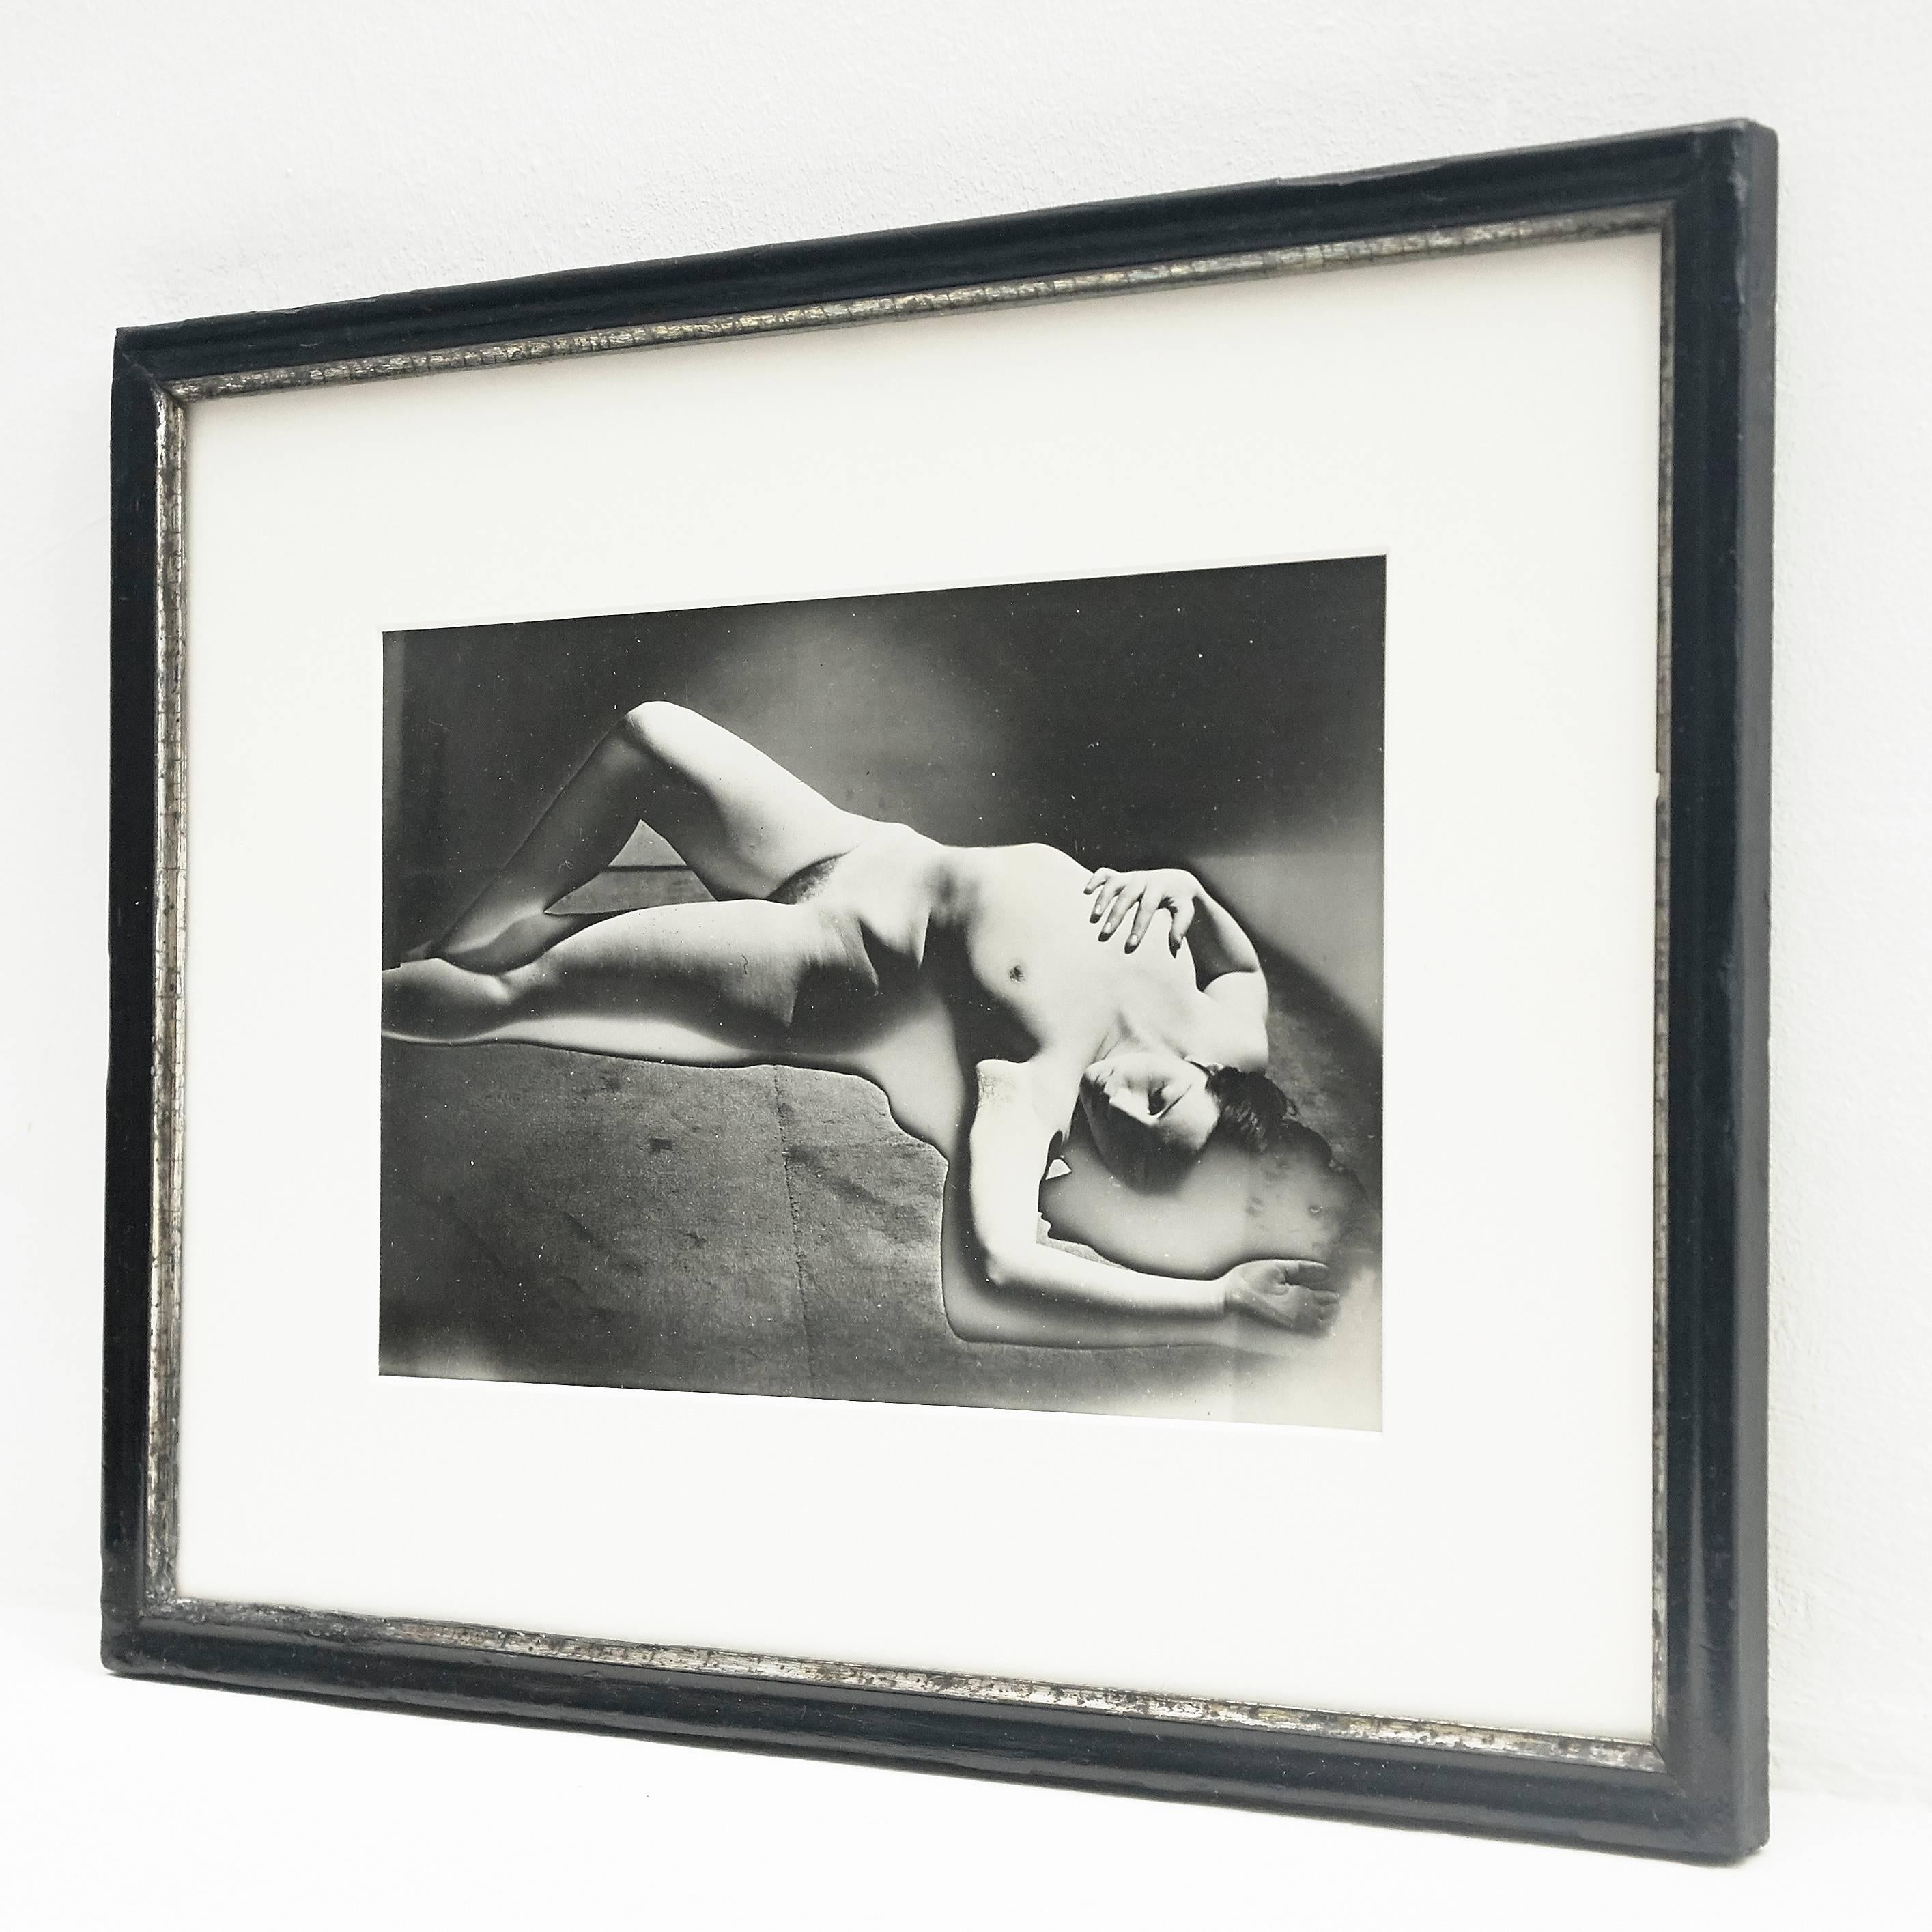 'Primacy of Matter over Thought' by Man Ray 1929.

Treat female body as exploratory object, head not thinking, draining out access point.
Archive Photography printed circa 1970.

Gelatin silver bromide 23 x 16.
Framed on a 19th century